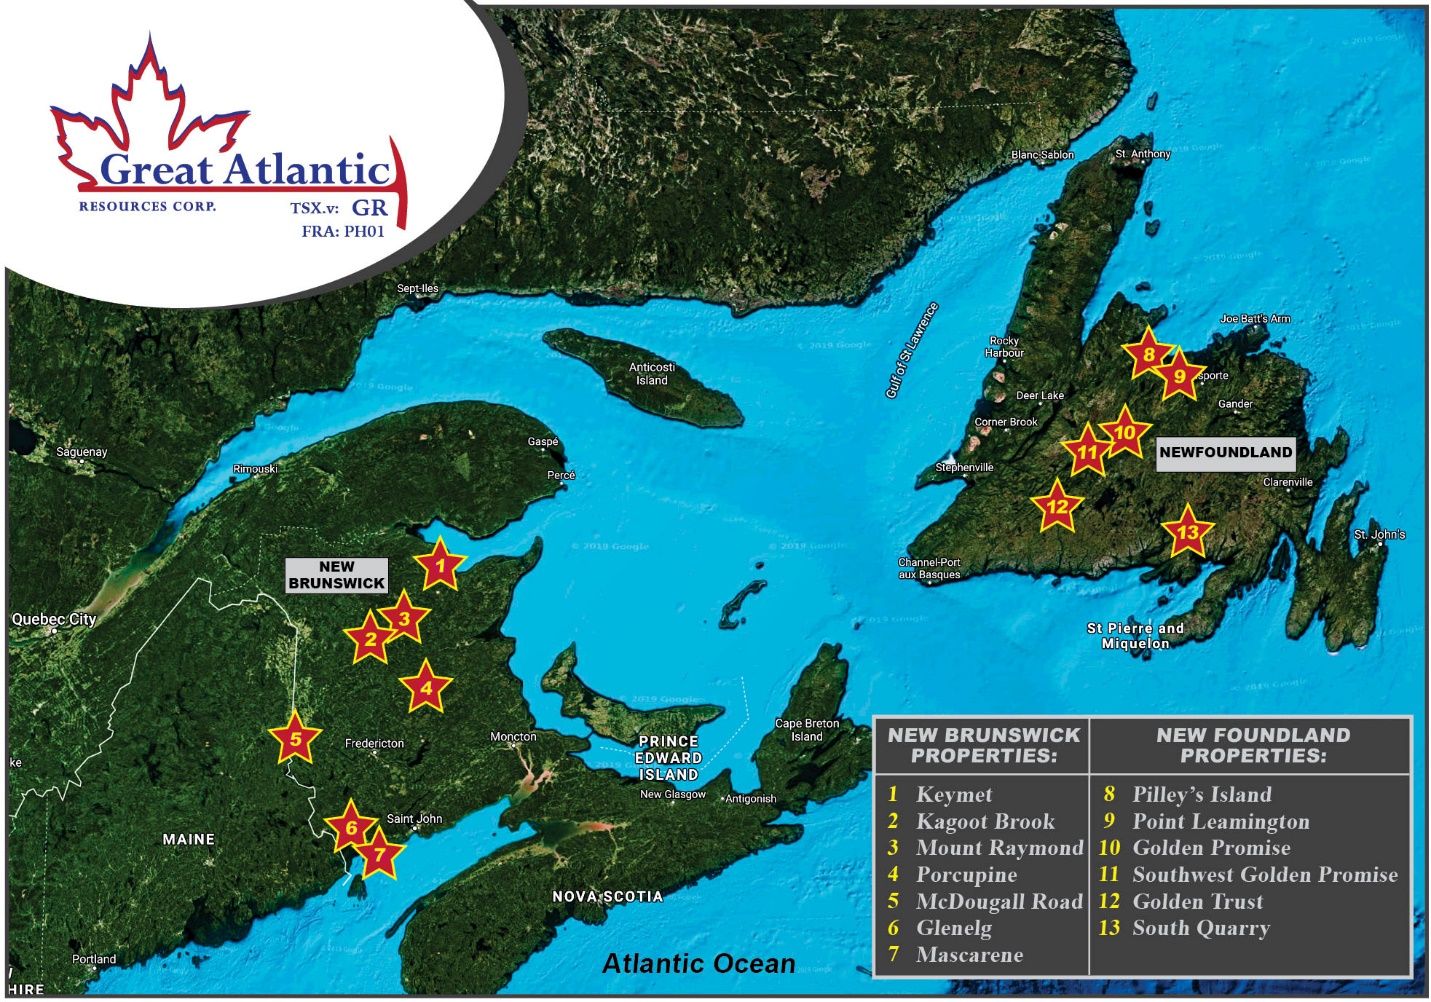 Great Atlantic Resources Corp., Friday, November 20, 2020, Press release picture